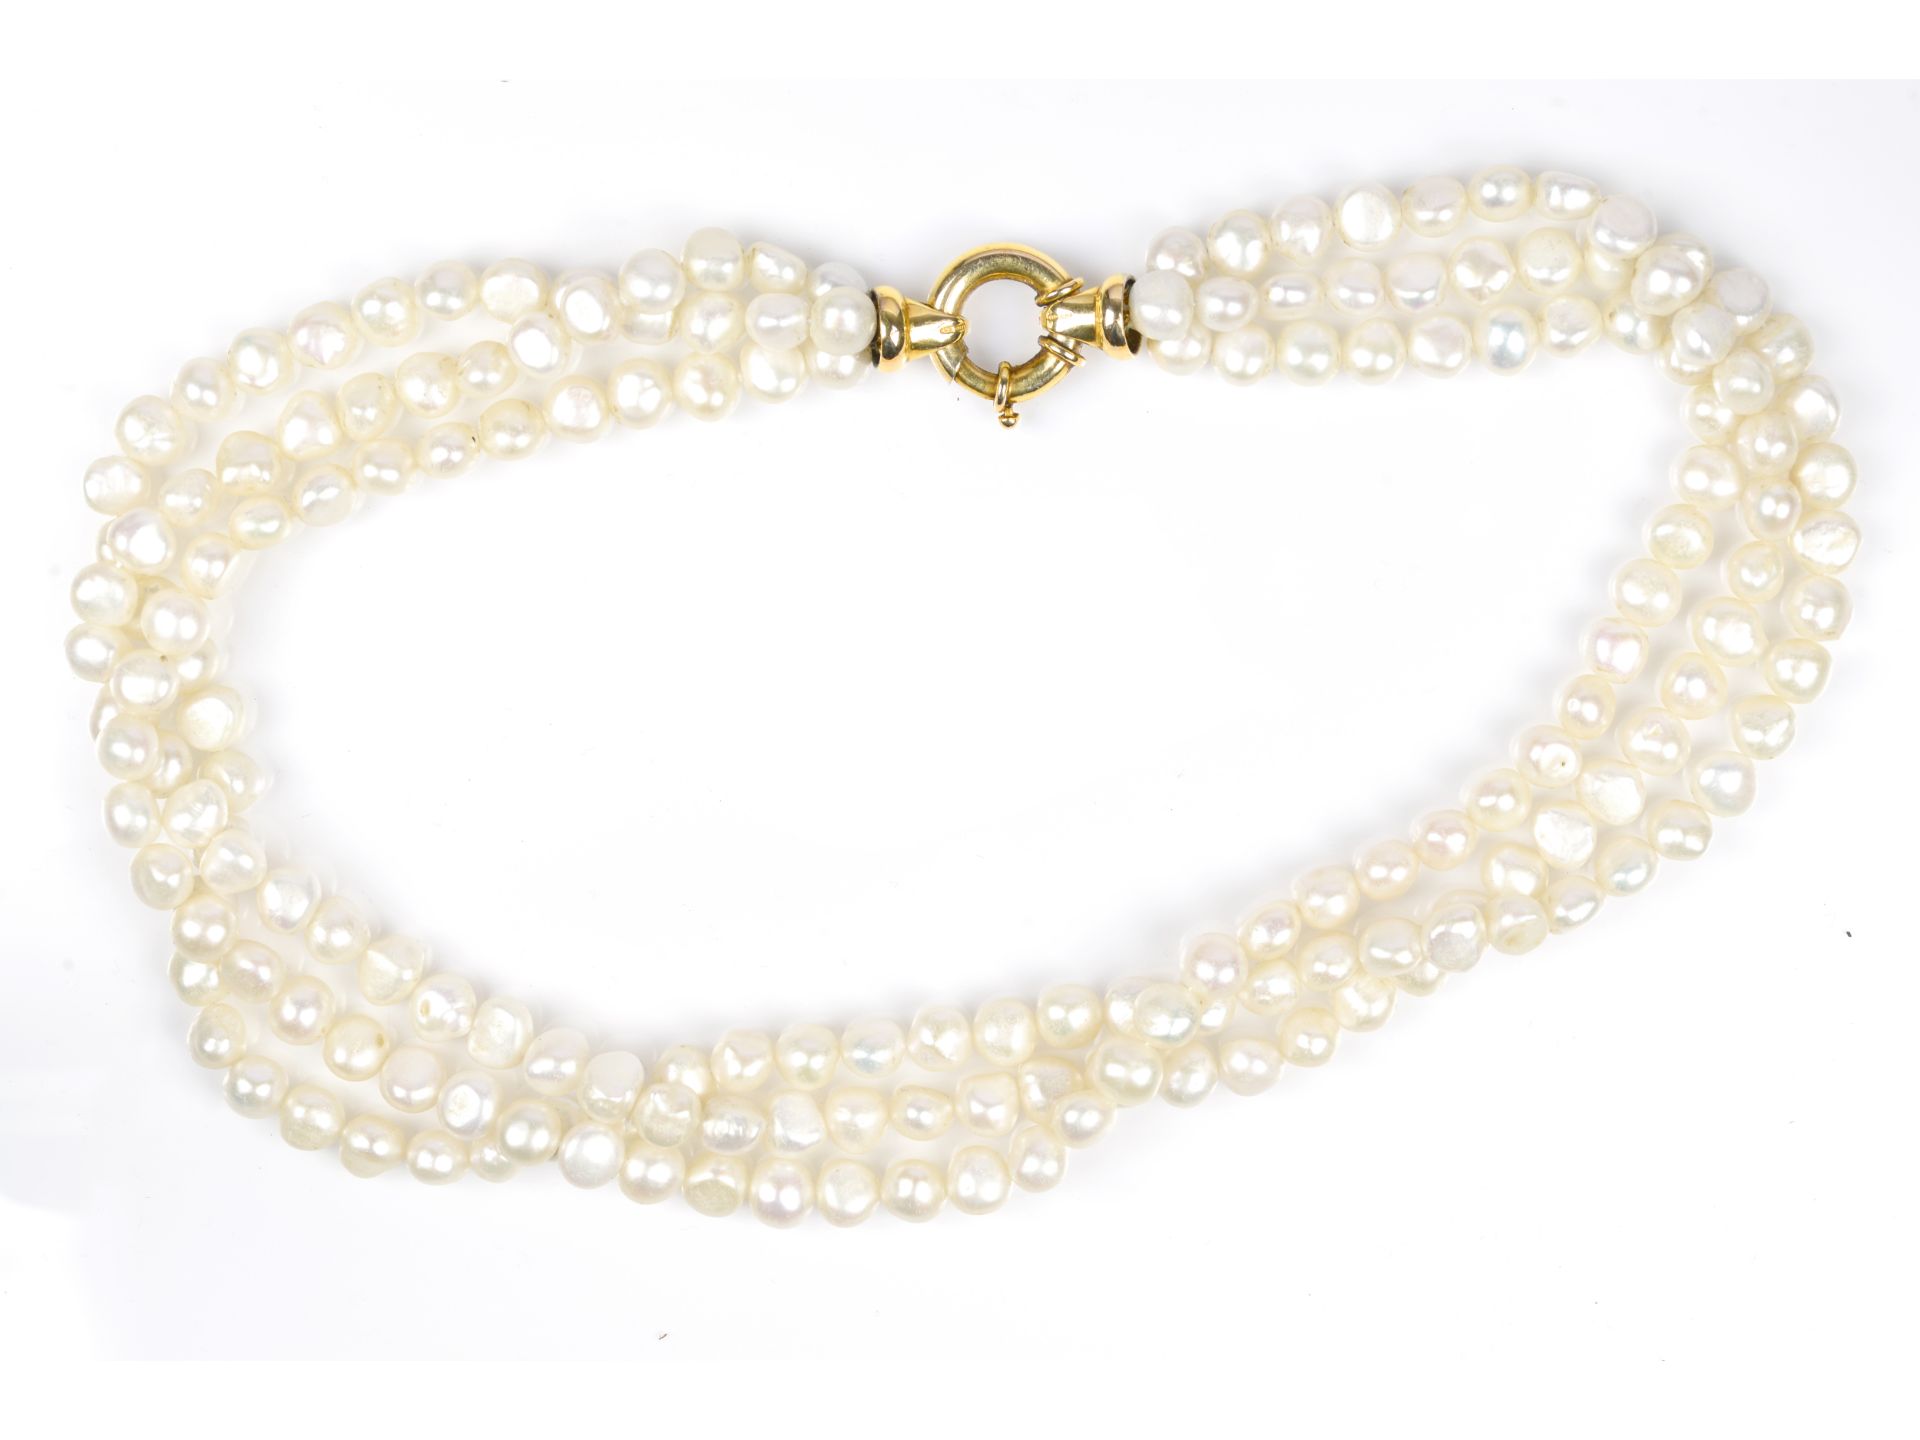 Three-row pearl necklace - Image 2 of 2